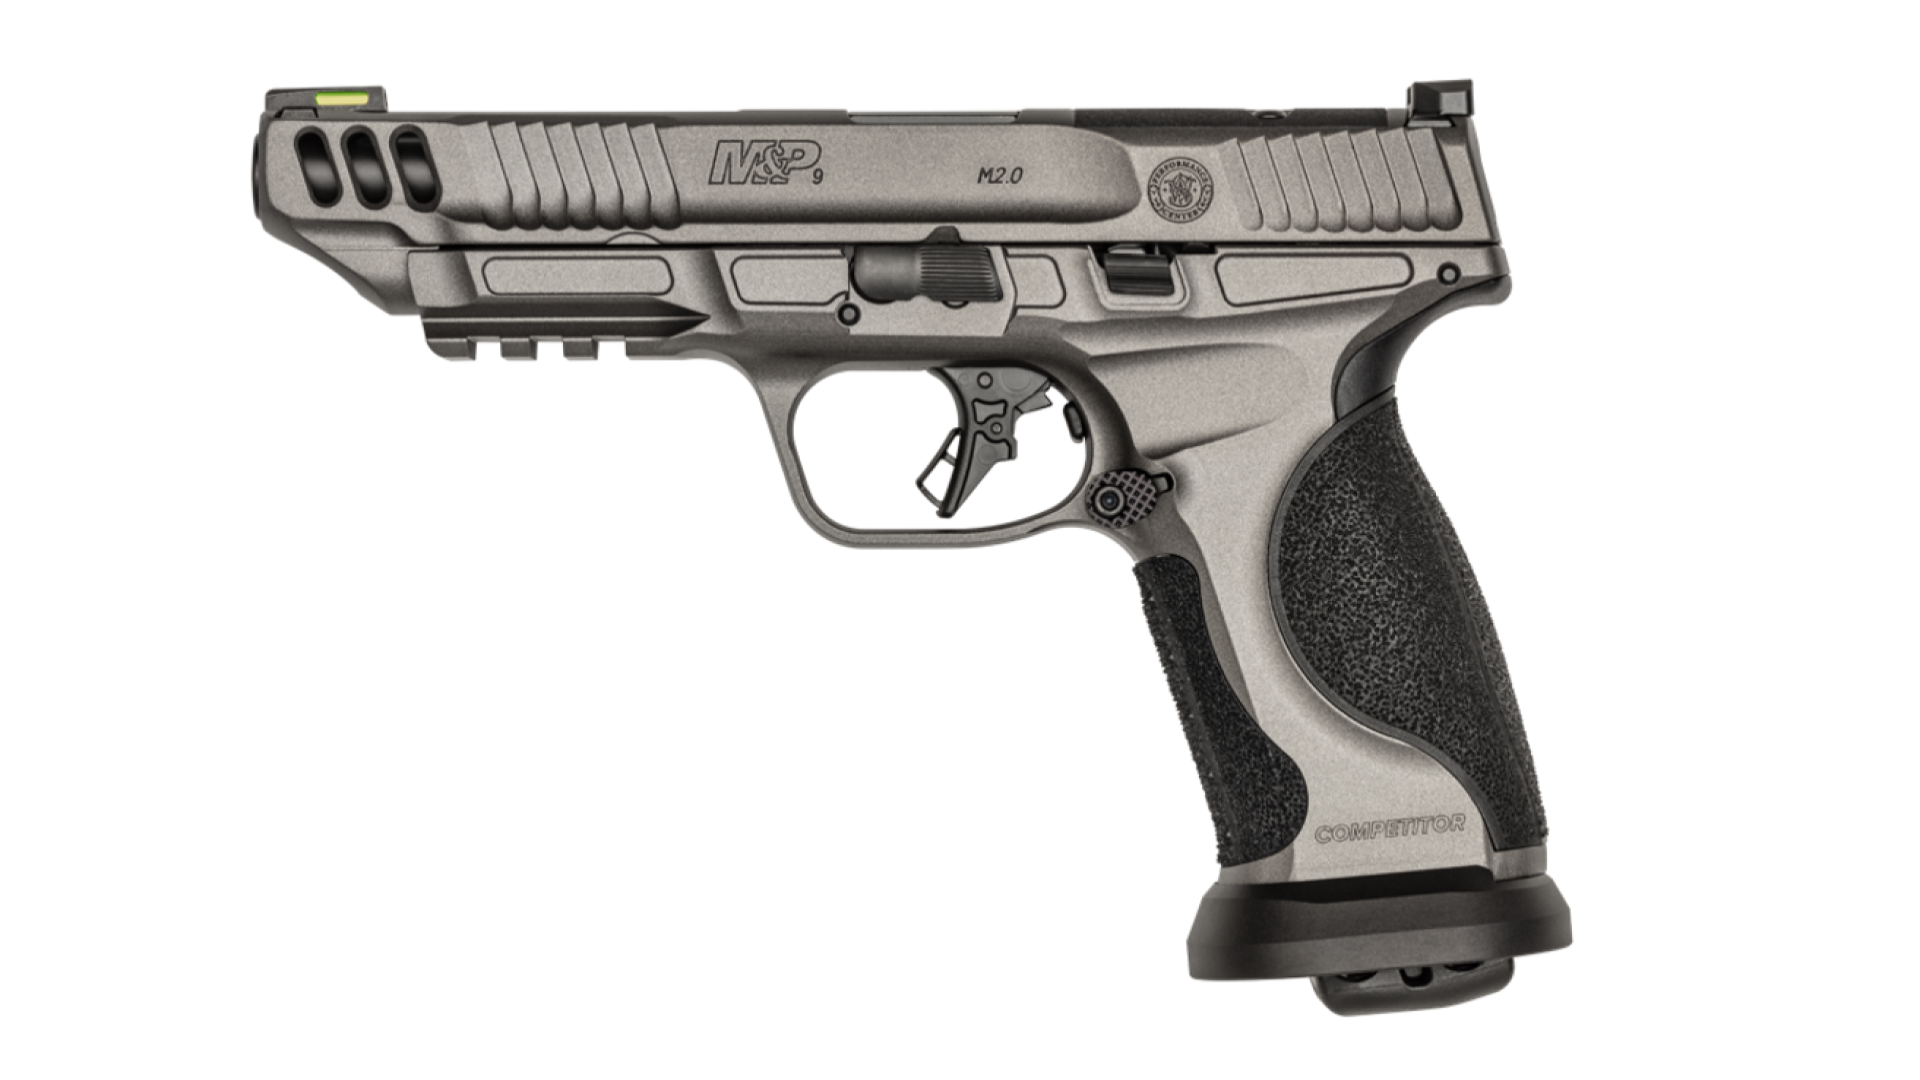 NRA Women | New for 2022: Smith & Wesson M&P9 M2.0 Competitor Pistol